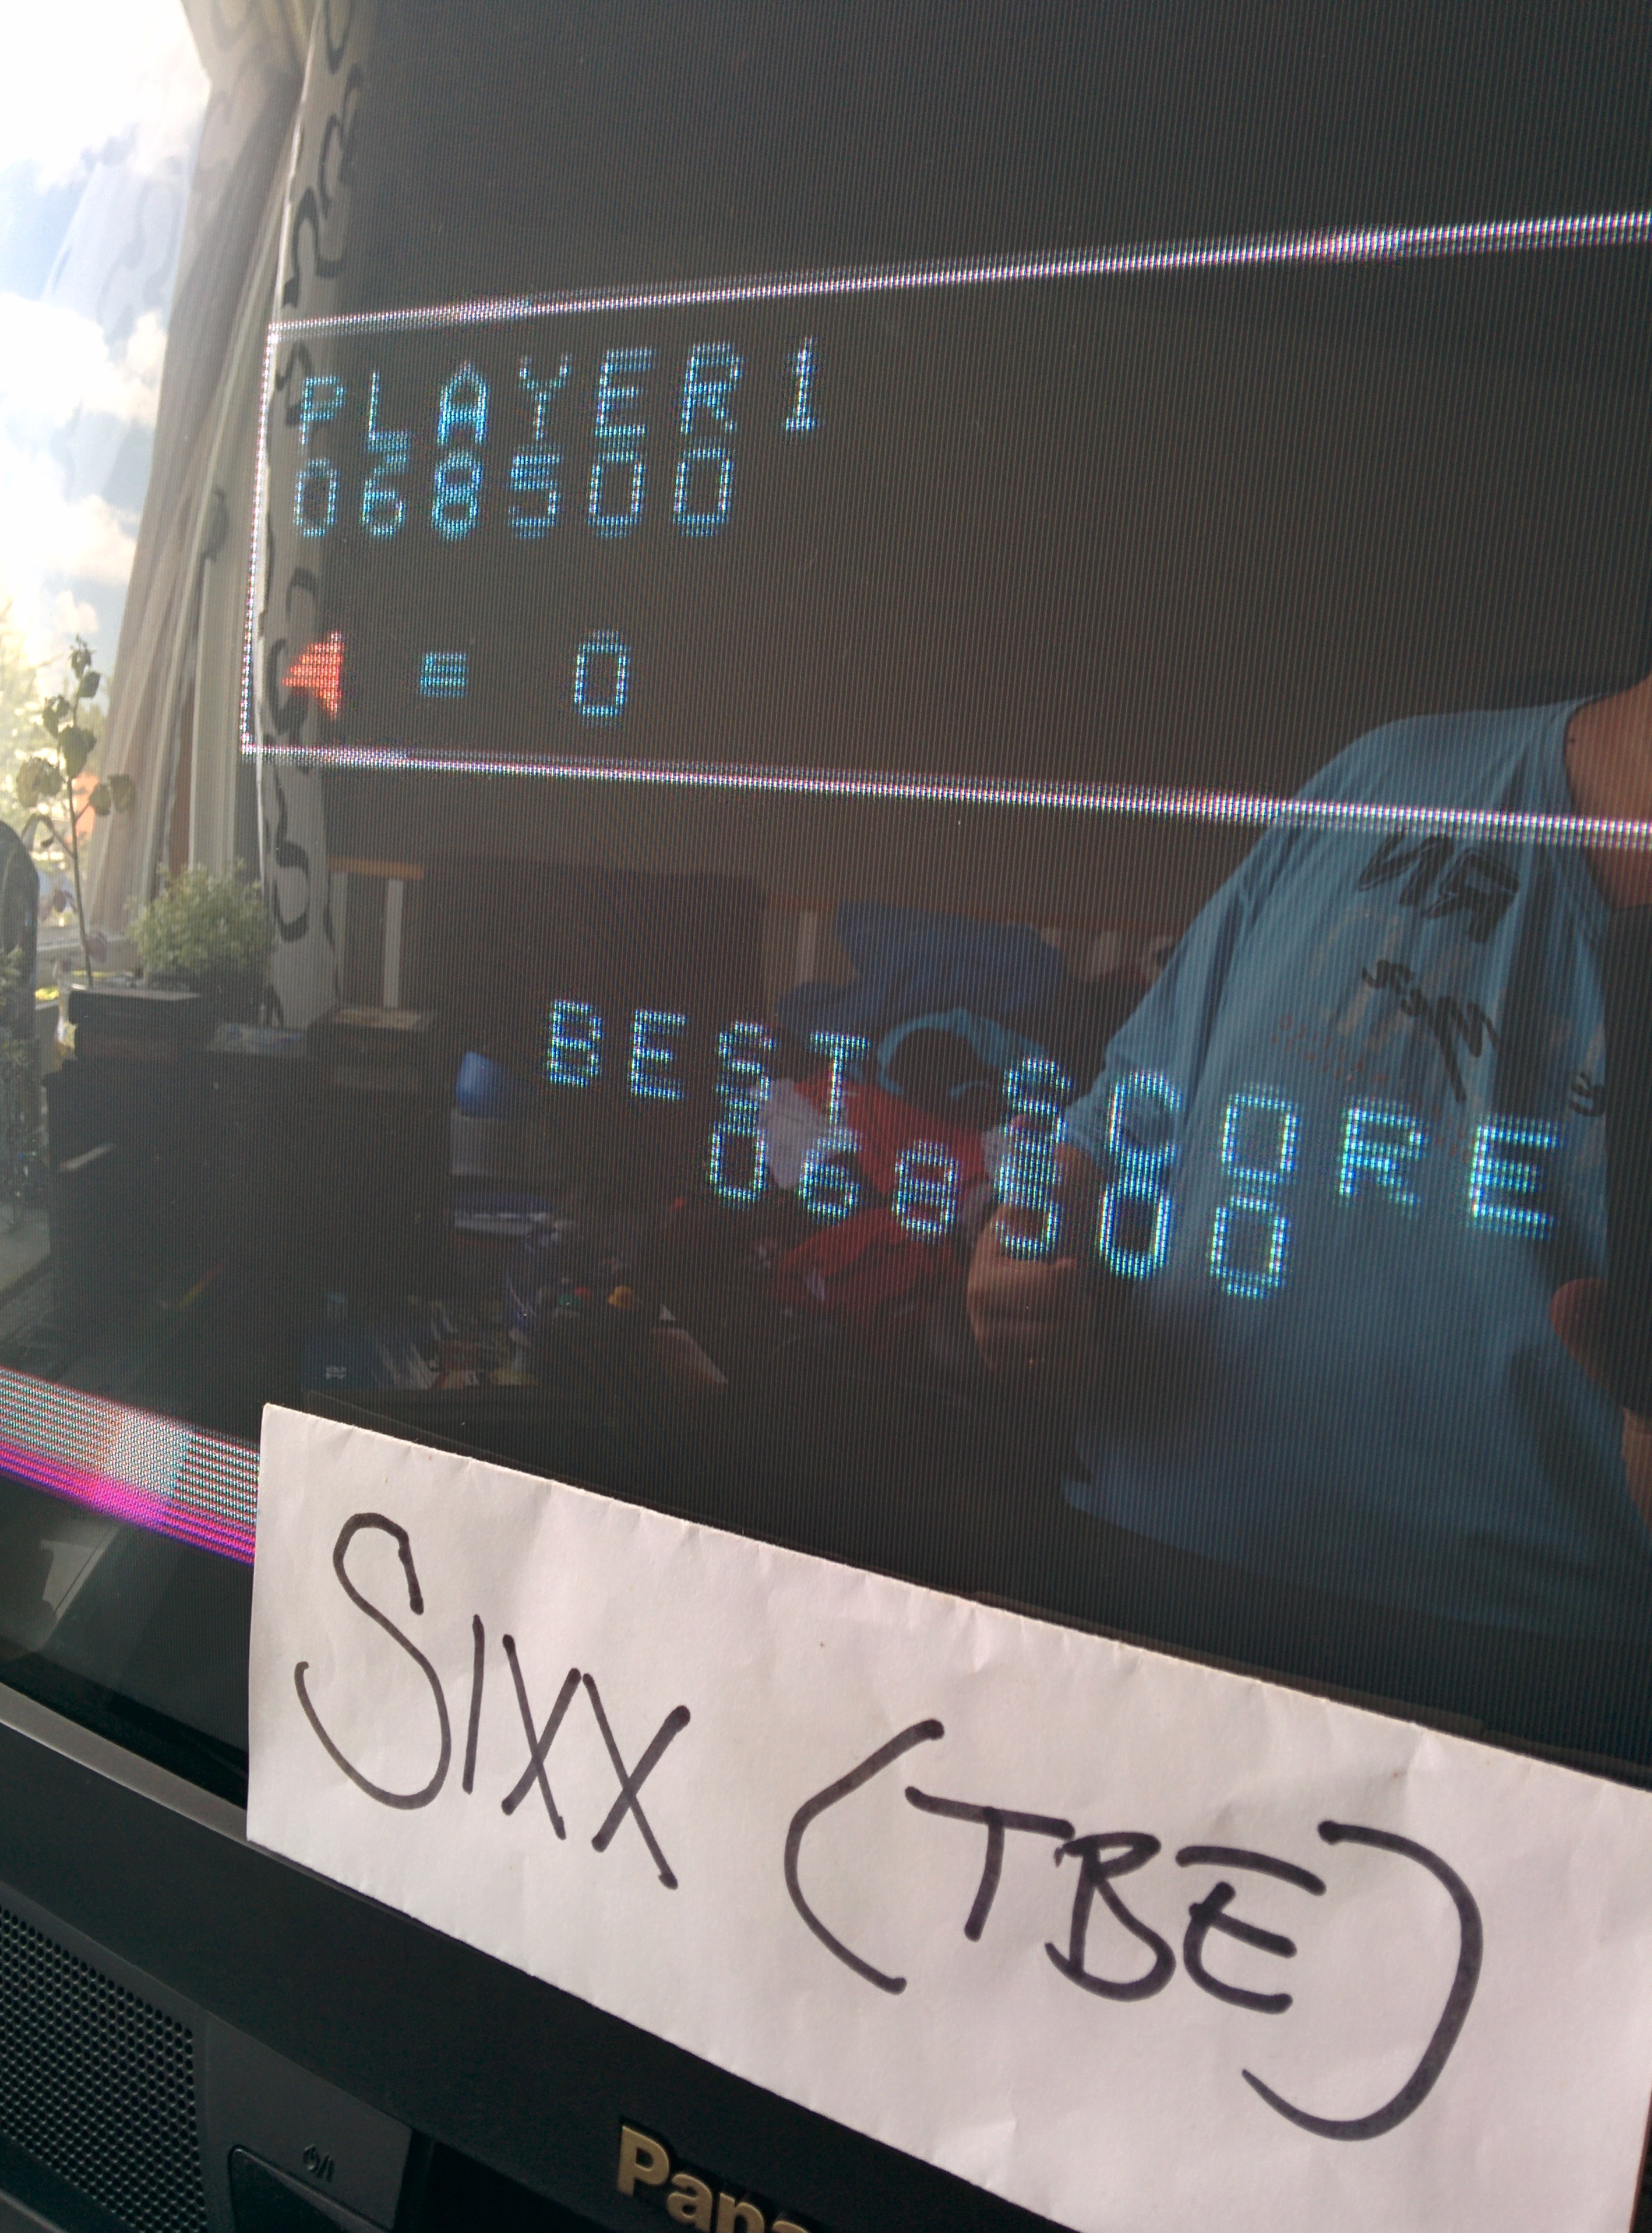 Sixx: Omega Race (Colecovision Emulated) 68,500 points on 2014-07-10 05:46:54